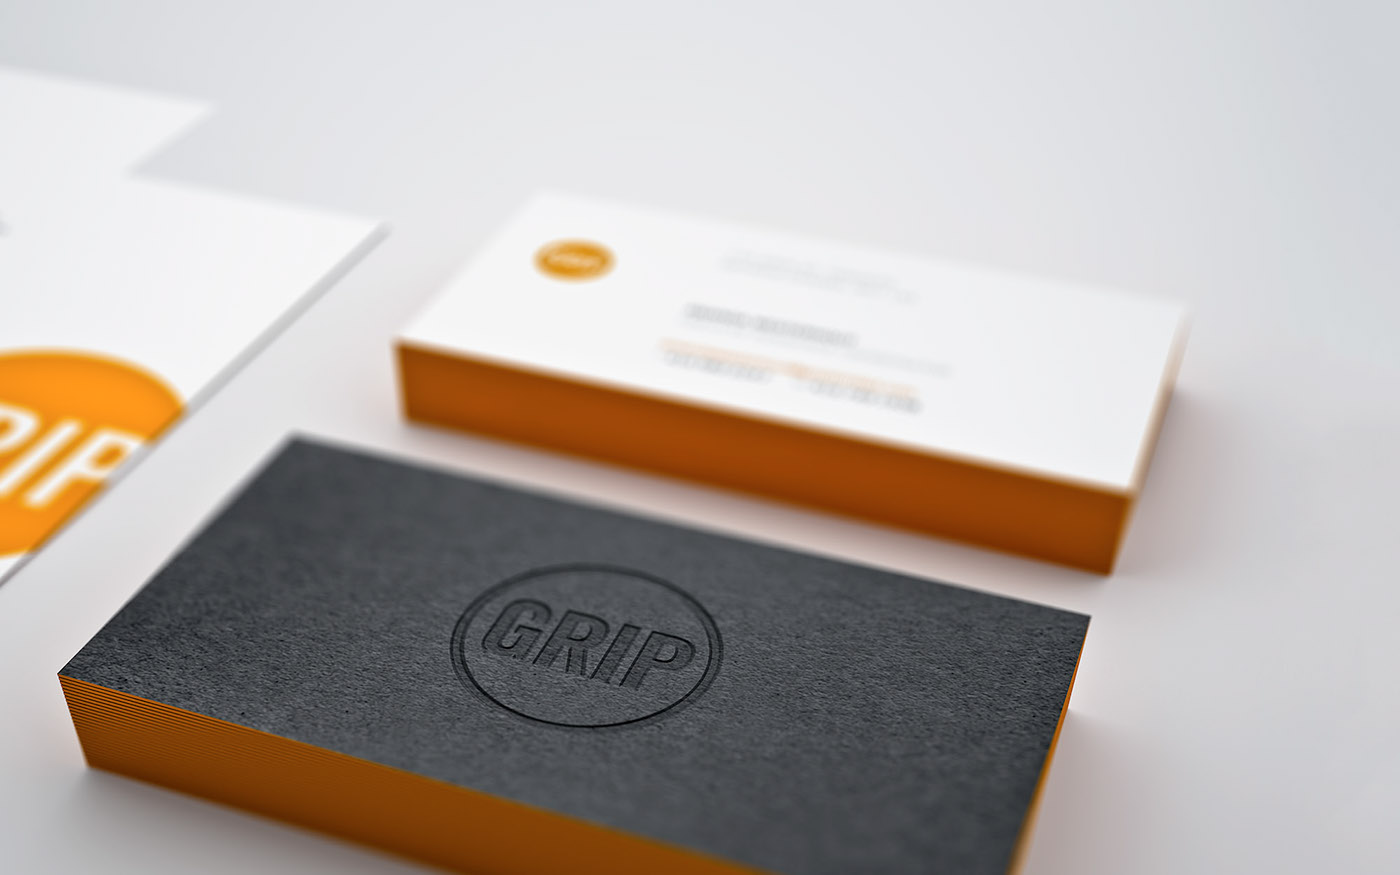 grip 3D stationary rendering logo redesign graphic design 